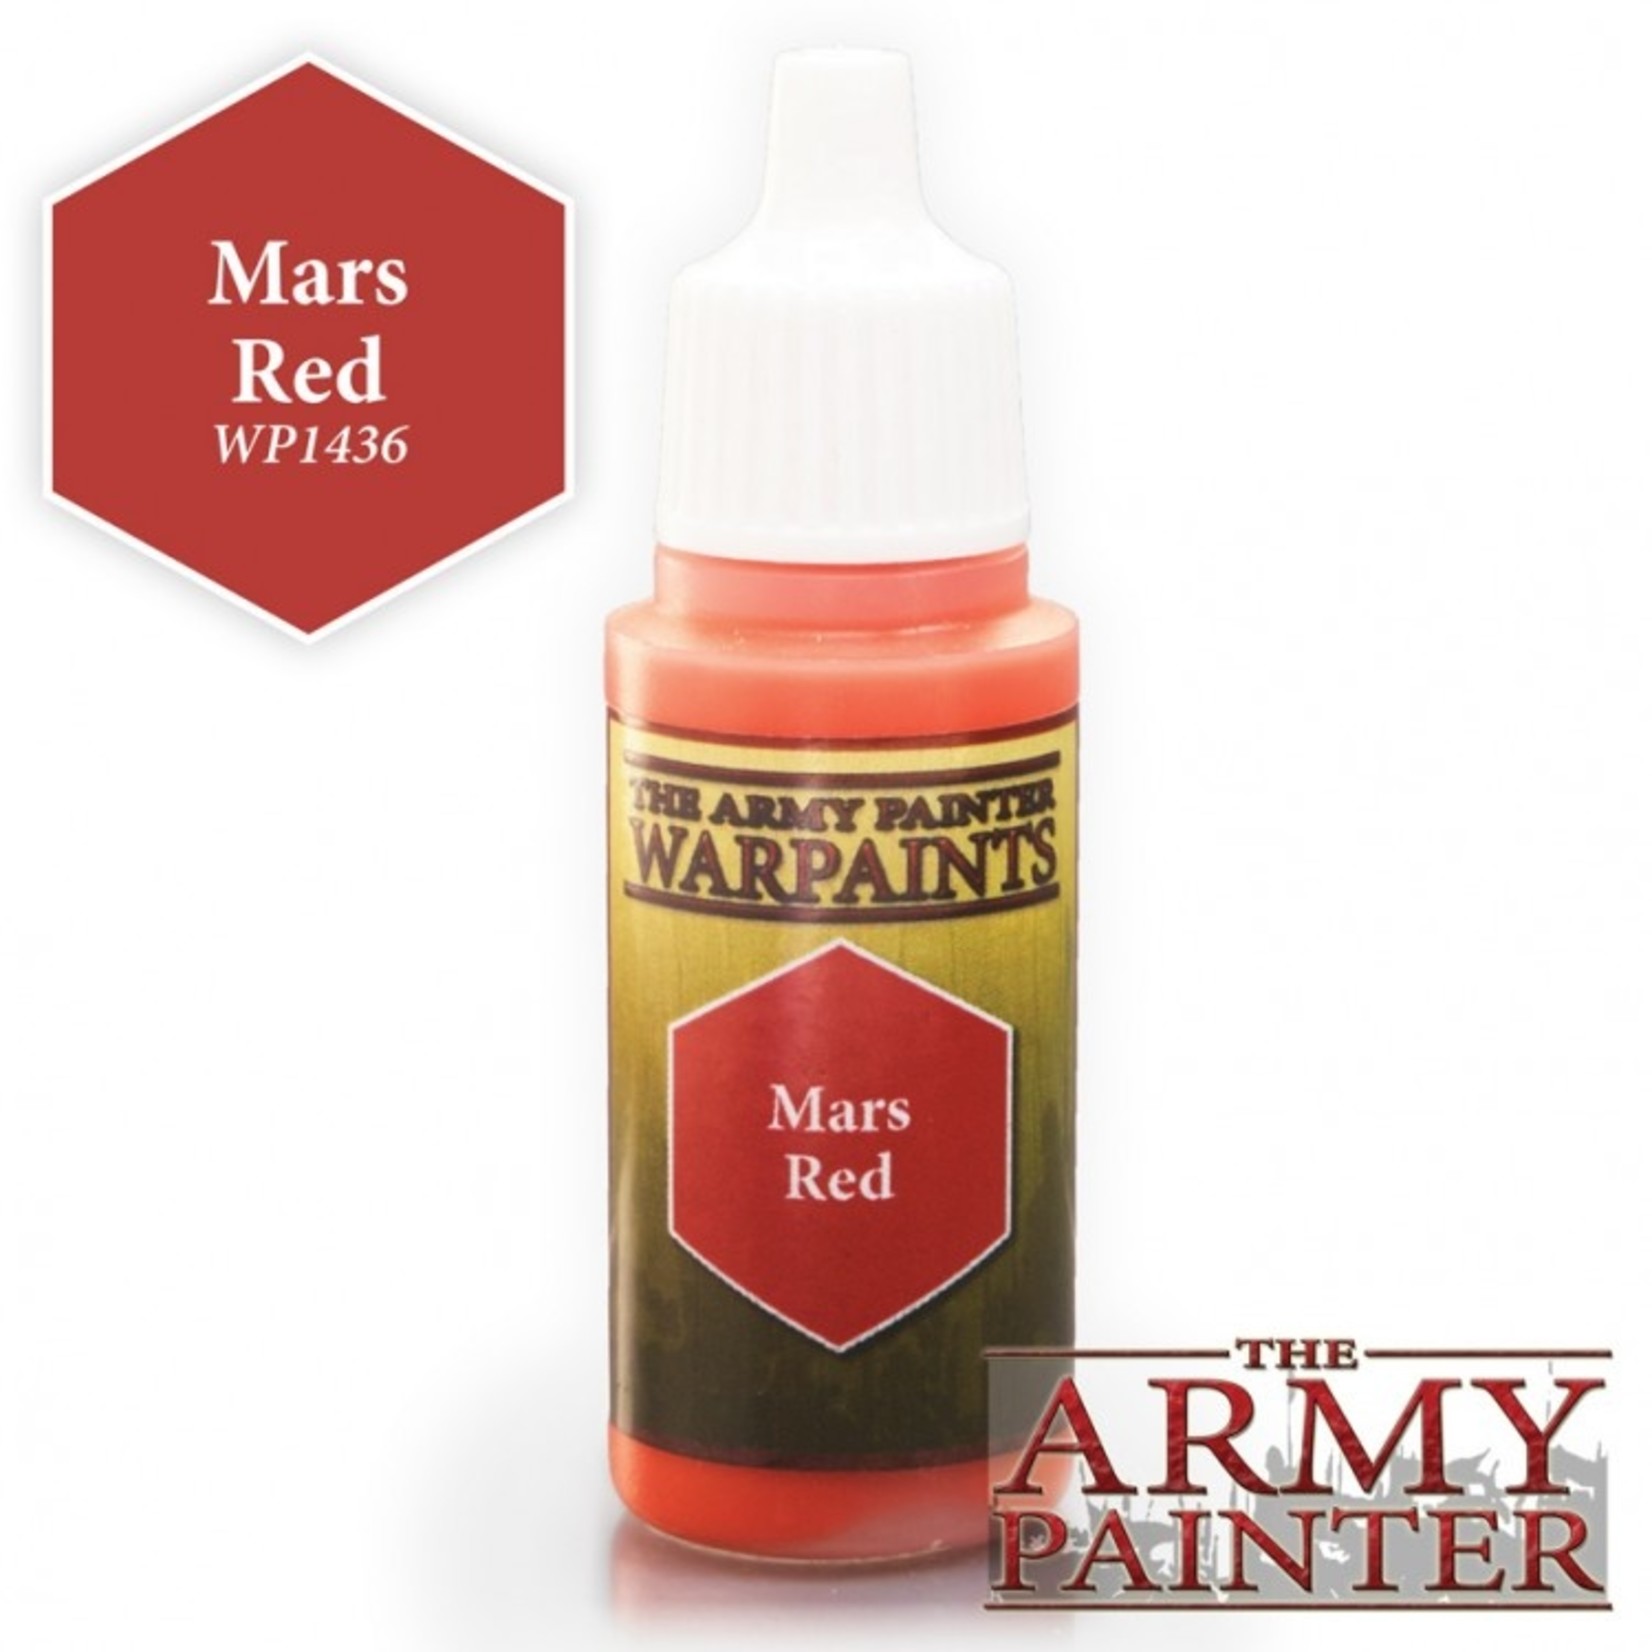 The Army Painter The Army Painter Mars Red 18ml